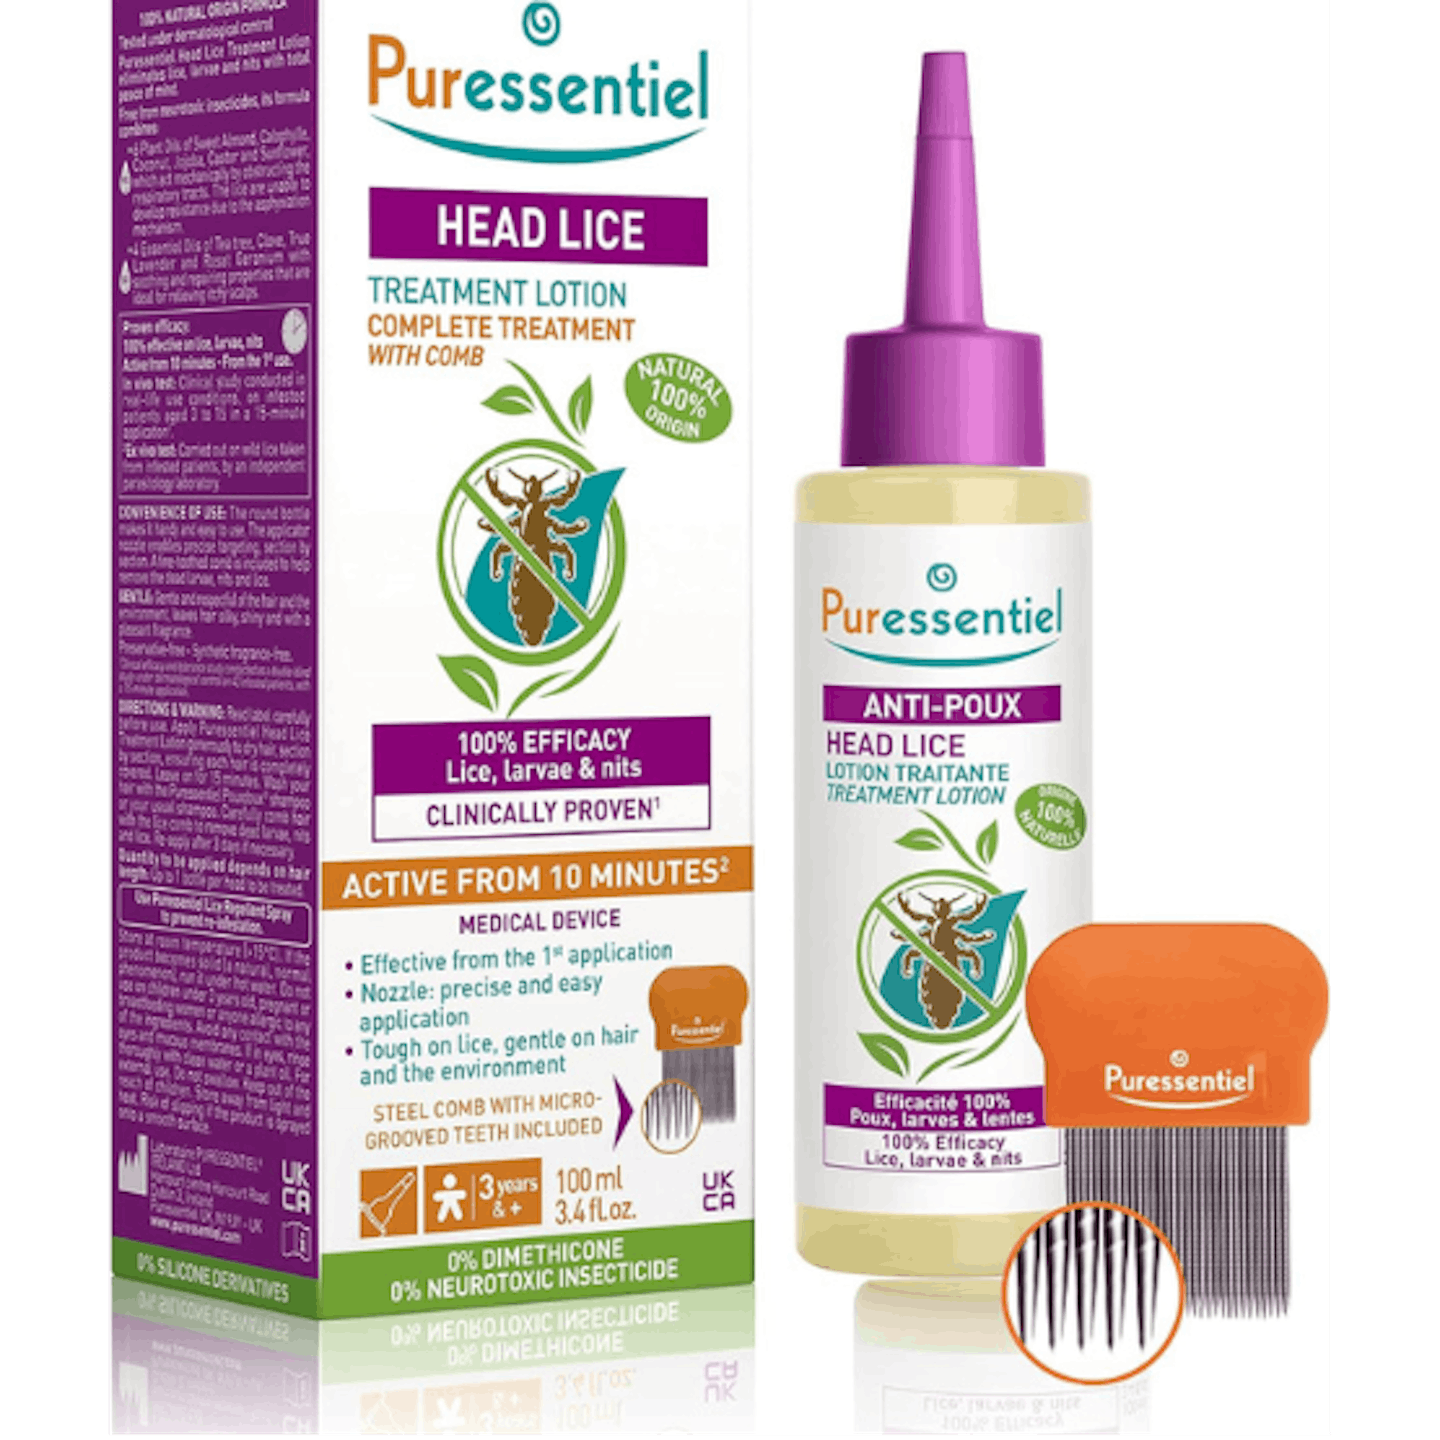 Puressential head lice treatment